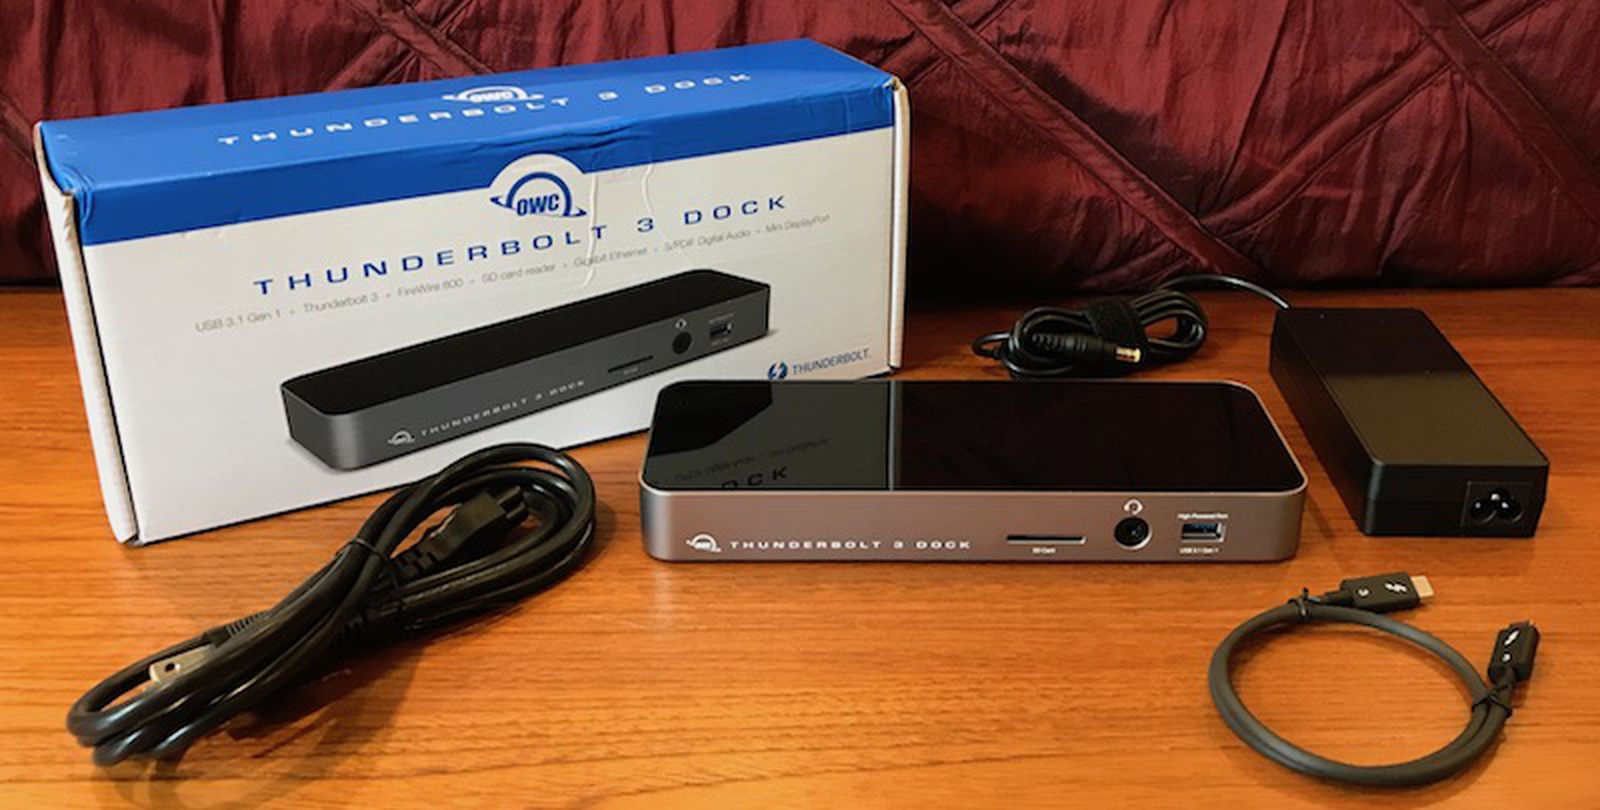 Review: OWC's Thunderbolt 3 Dock Gives Your MacBook Pro 13 More Ports to  Work With - MacRumors